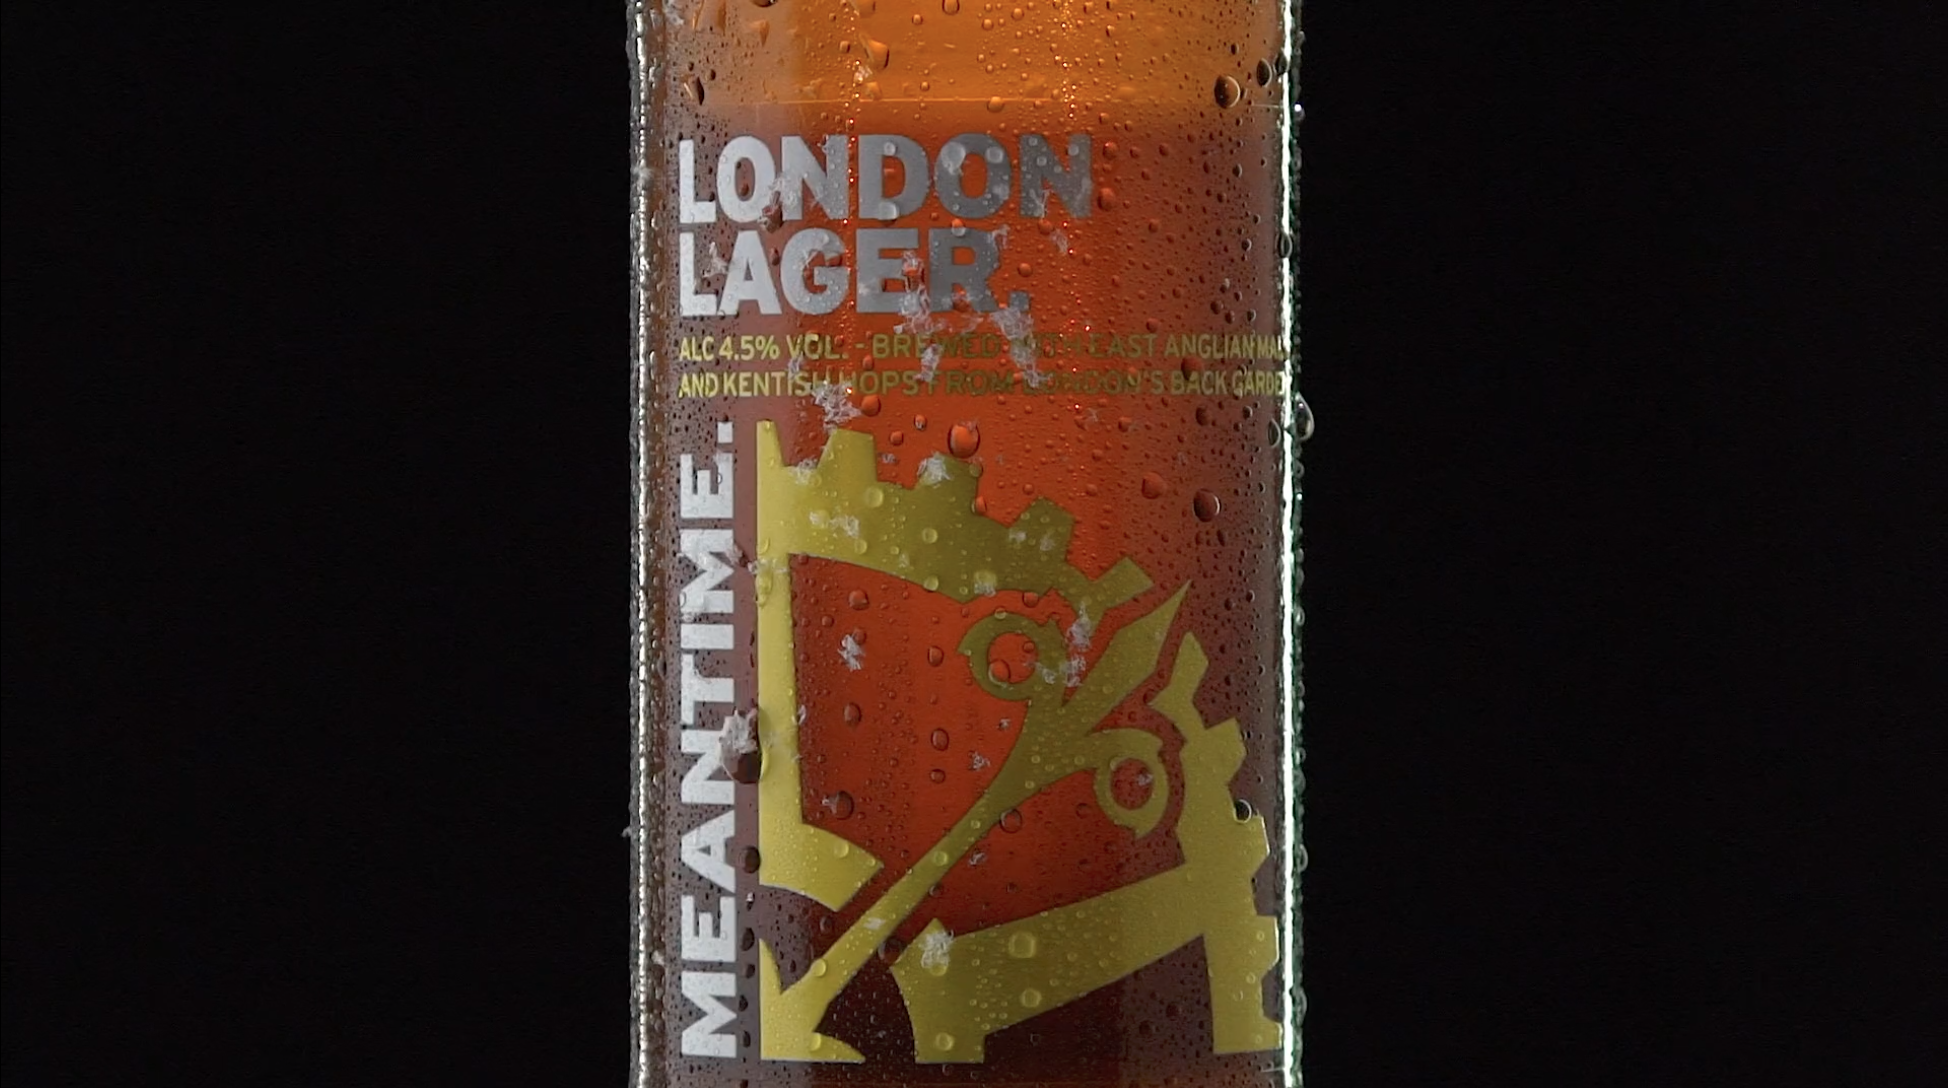  Meantime London Lager 